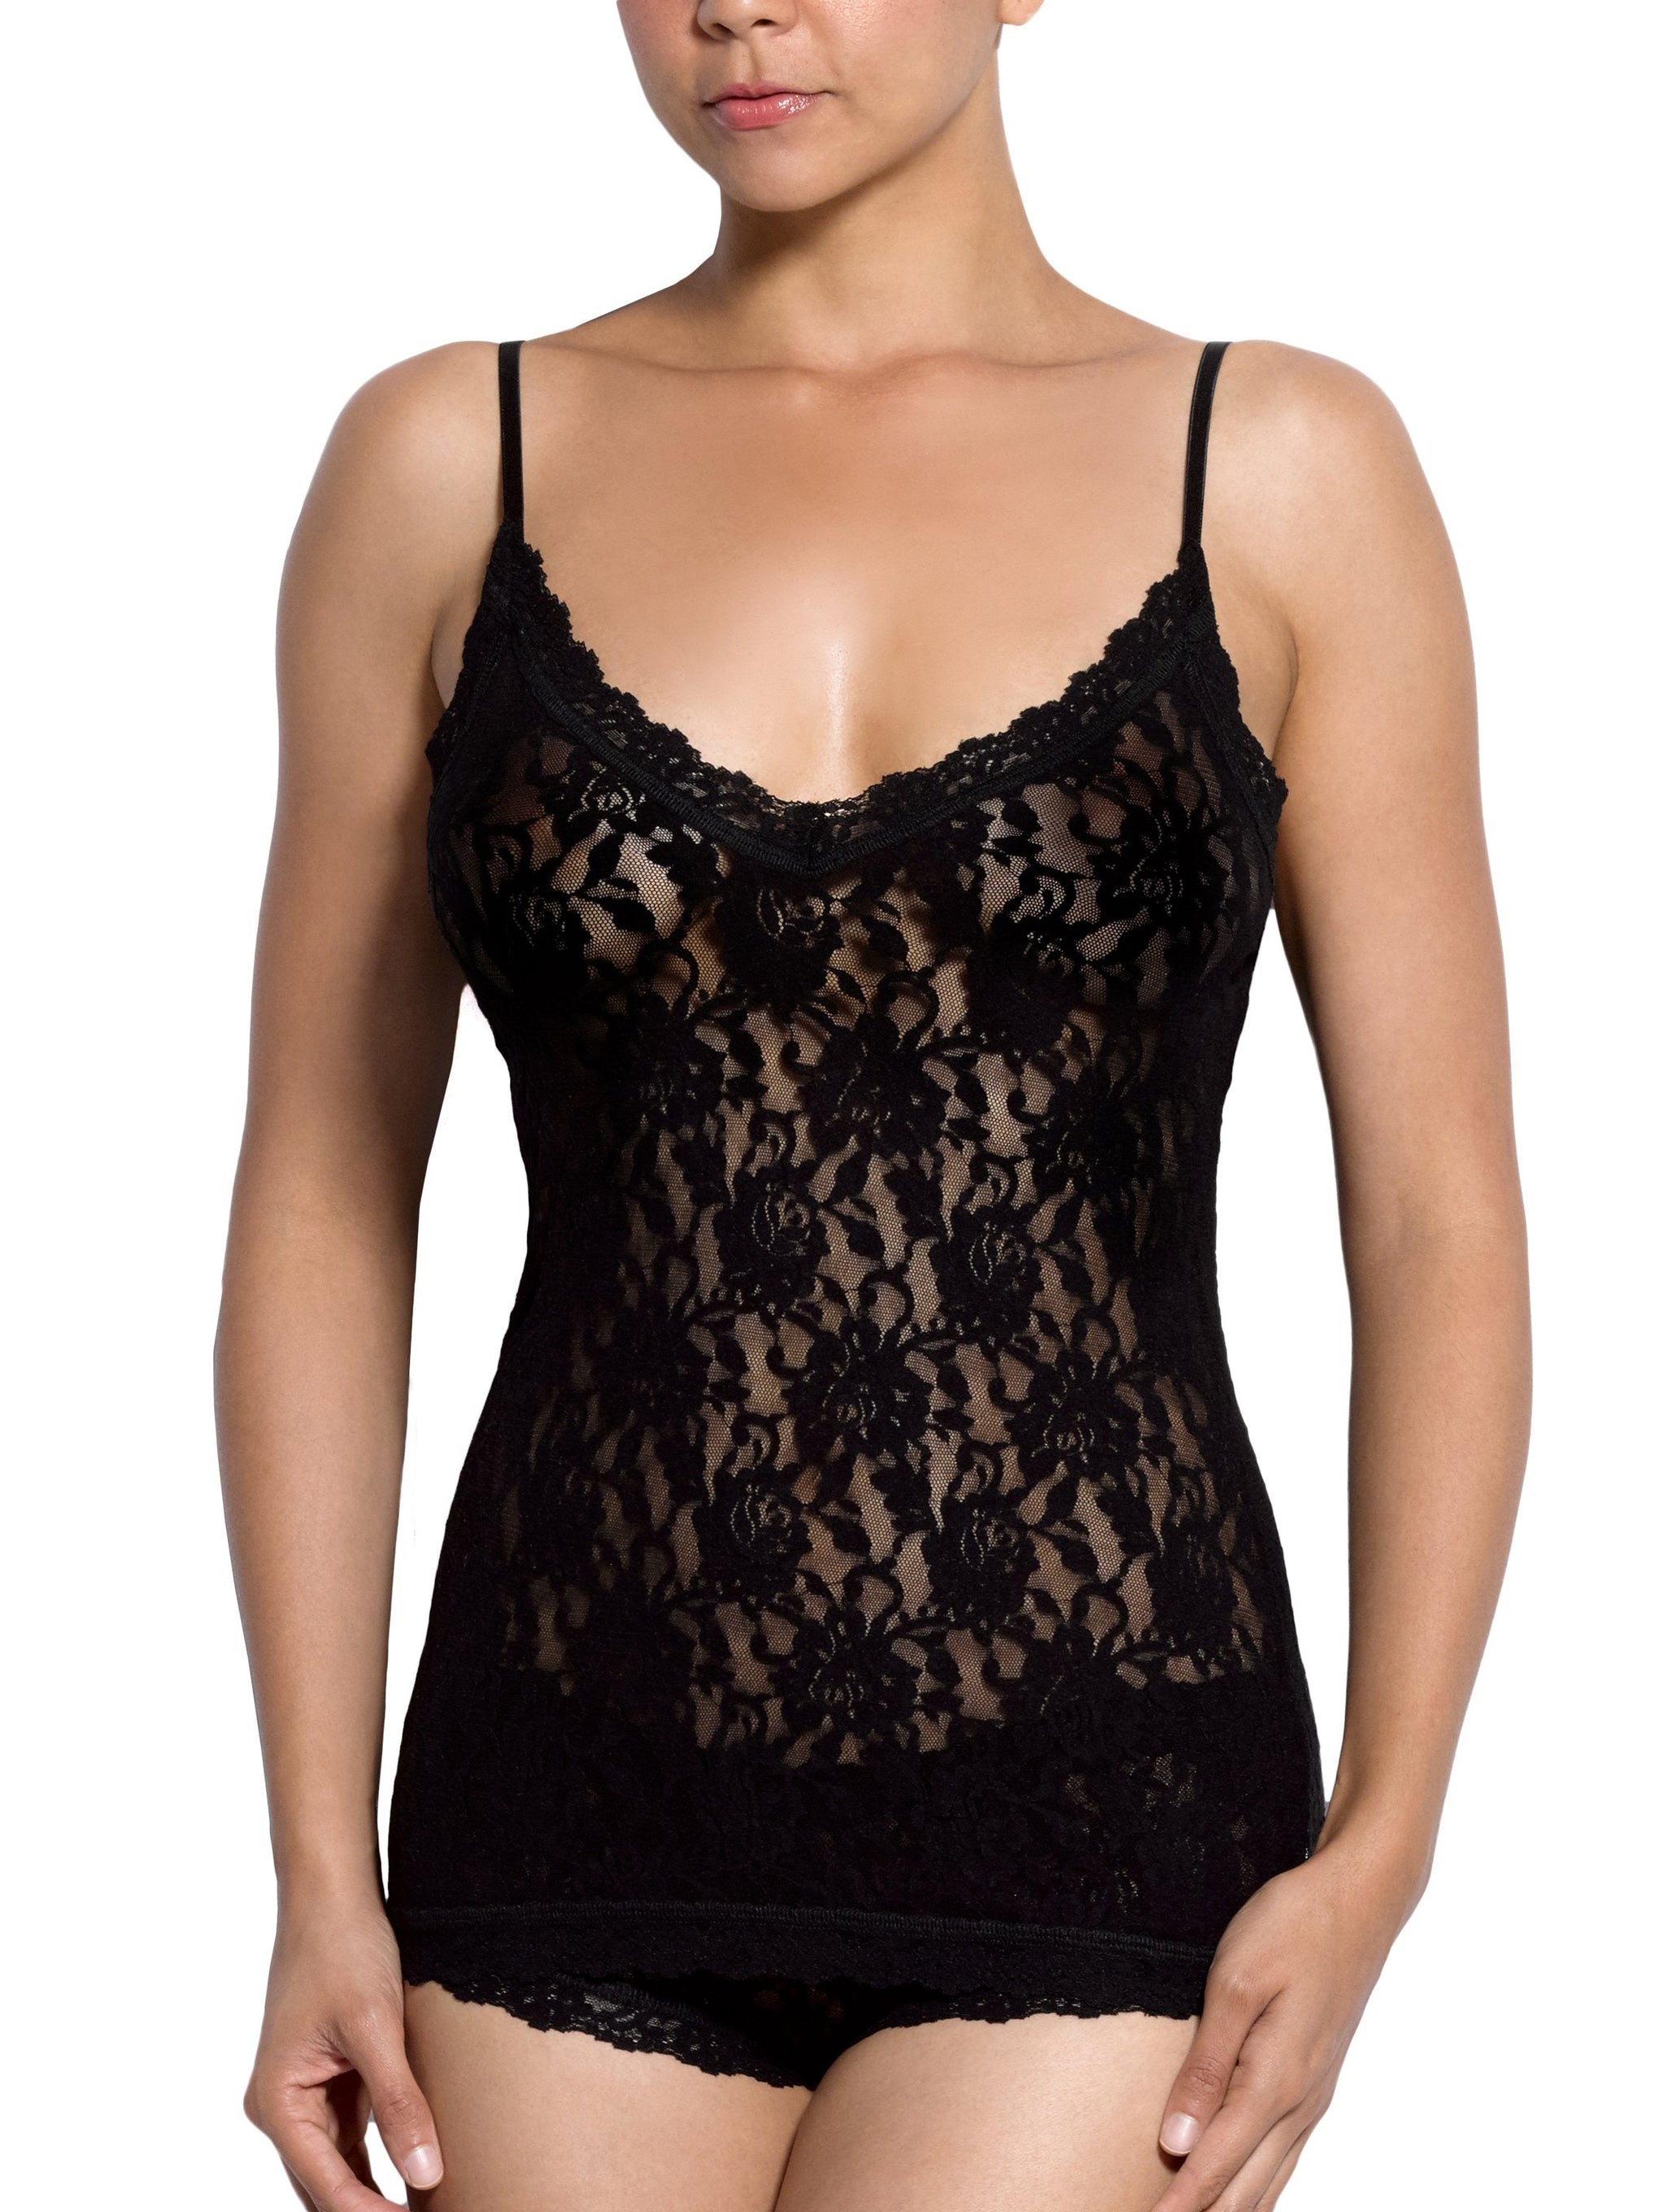 Hanky Panky Daily Lace Sheer Camisole